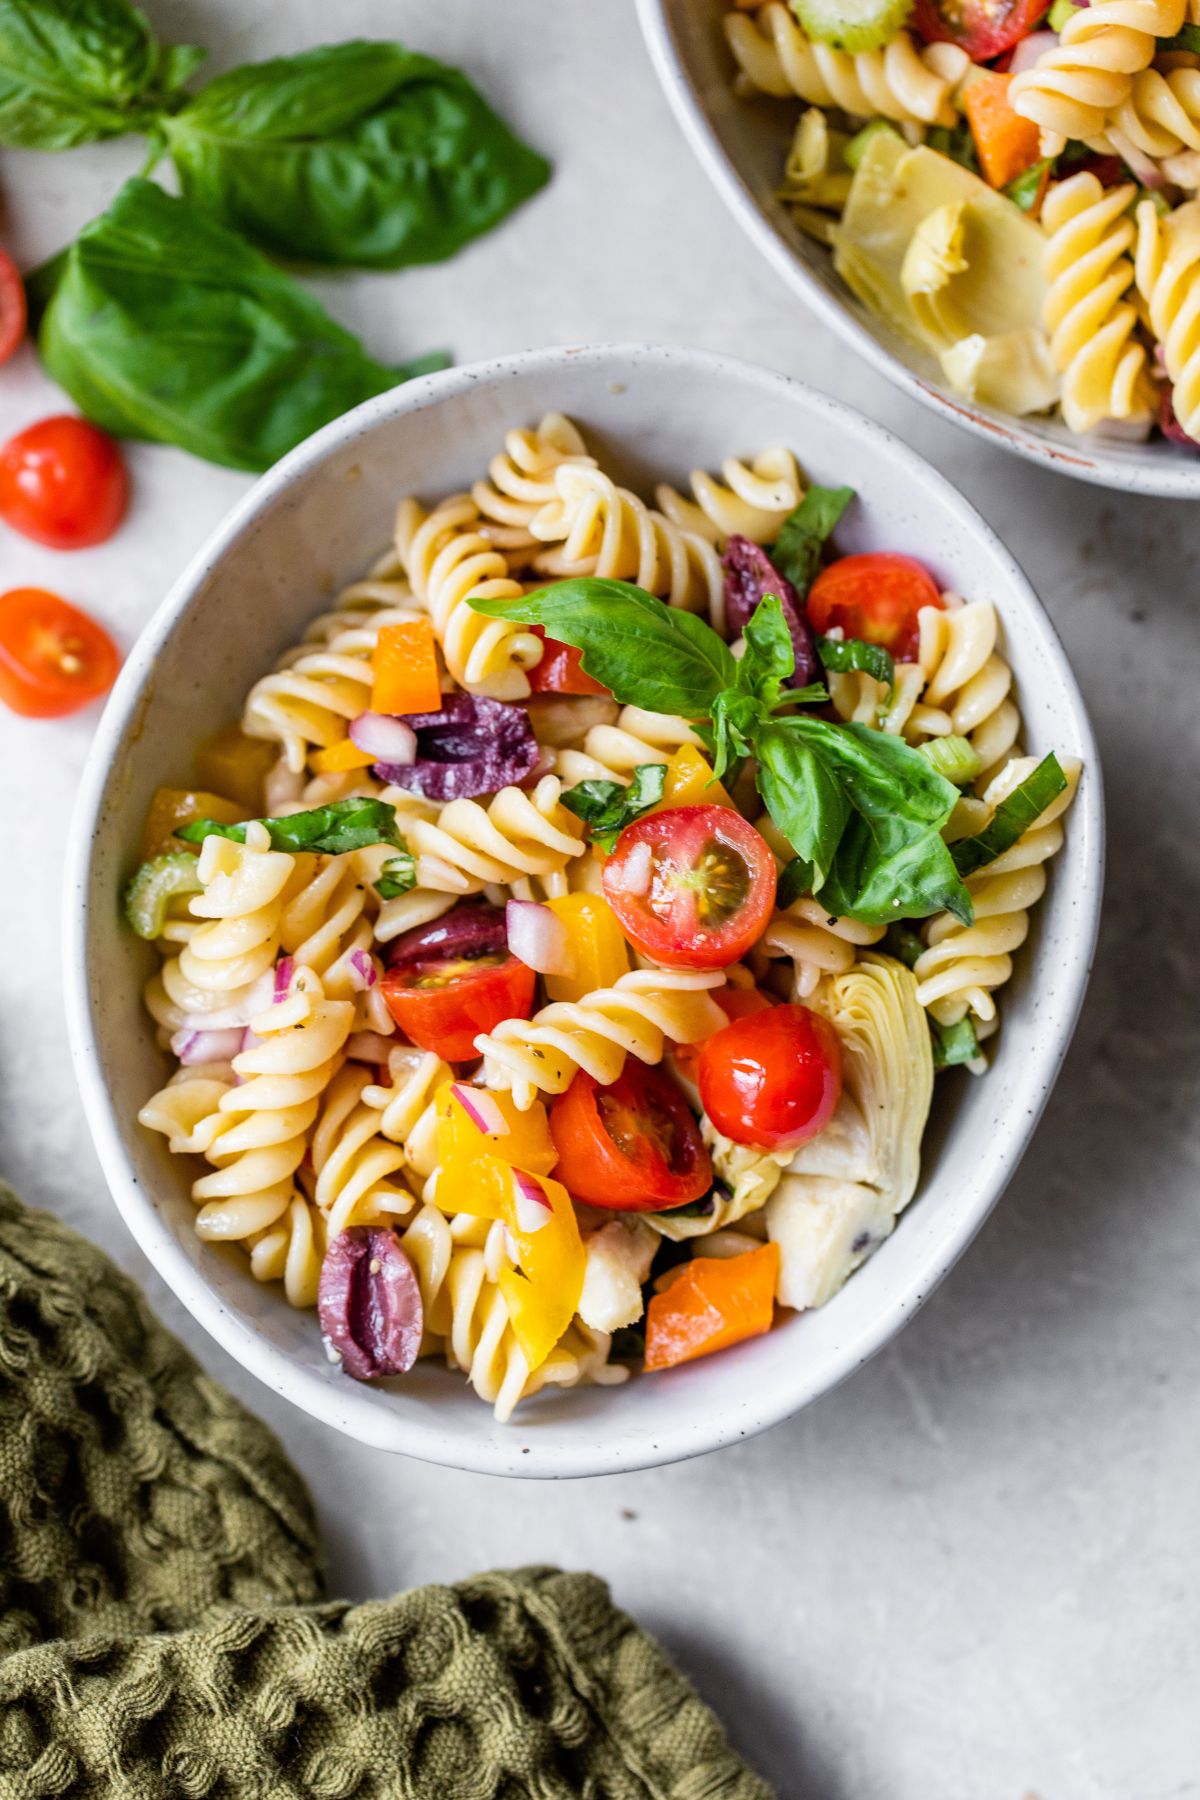 Pasta salad with tomatoes and fresh basil in a white bowl.